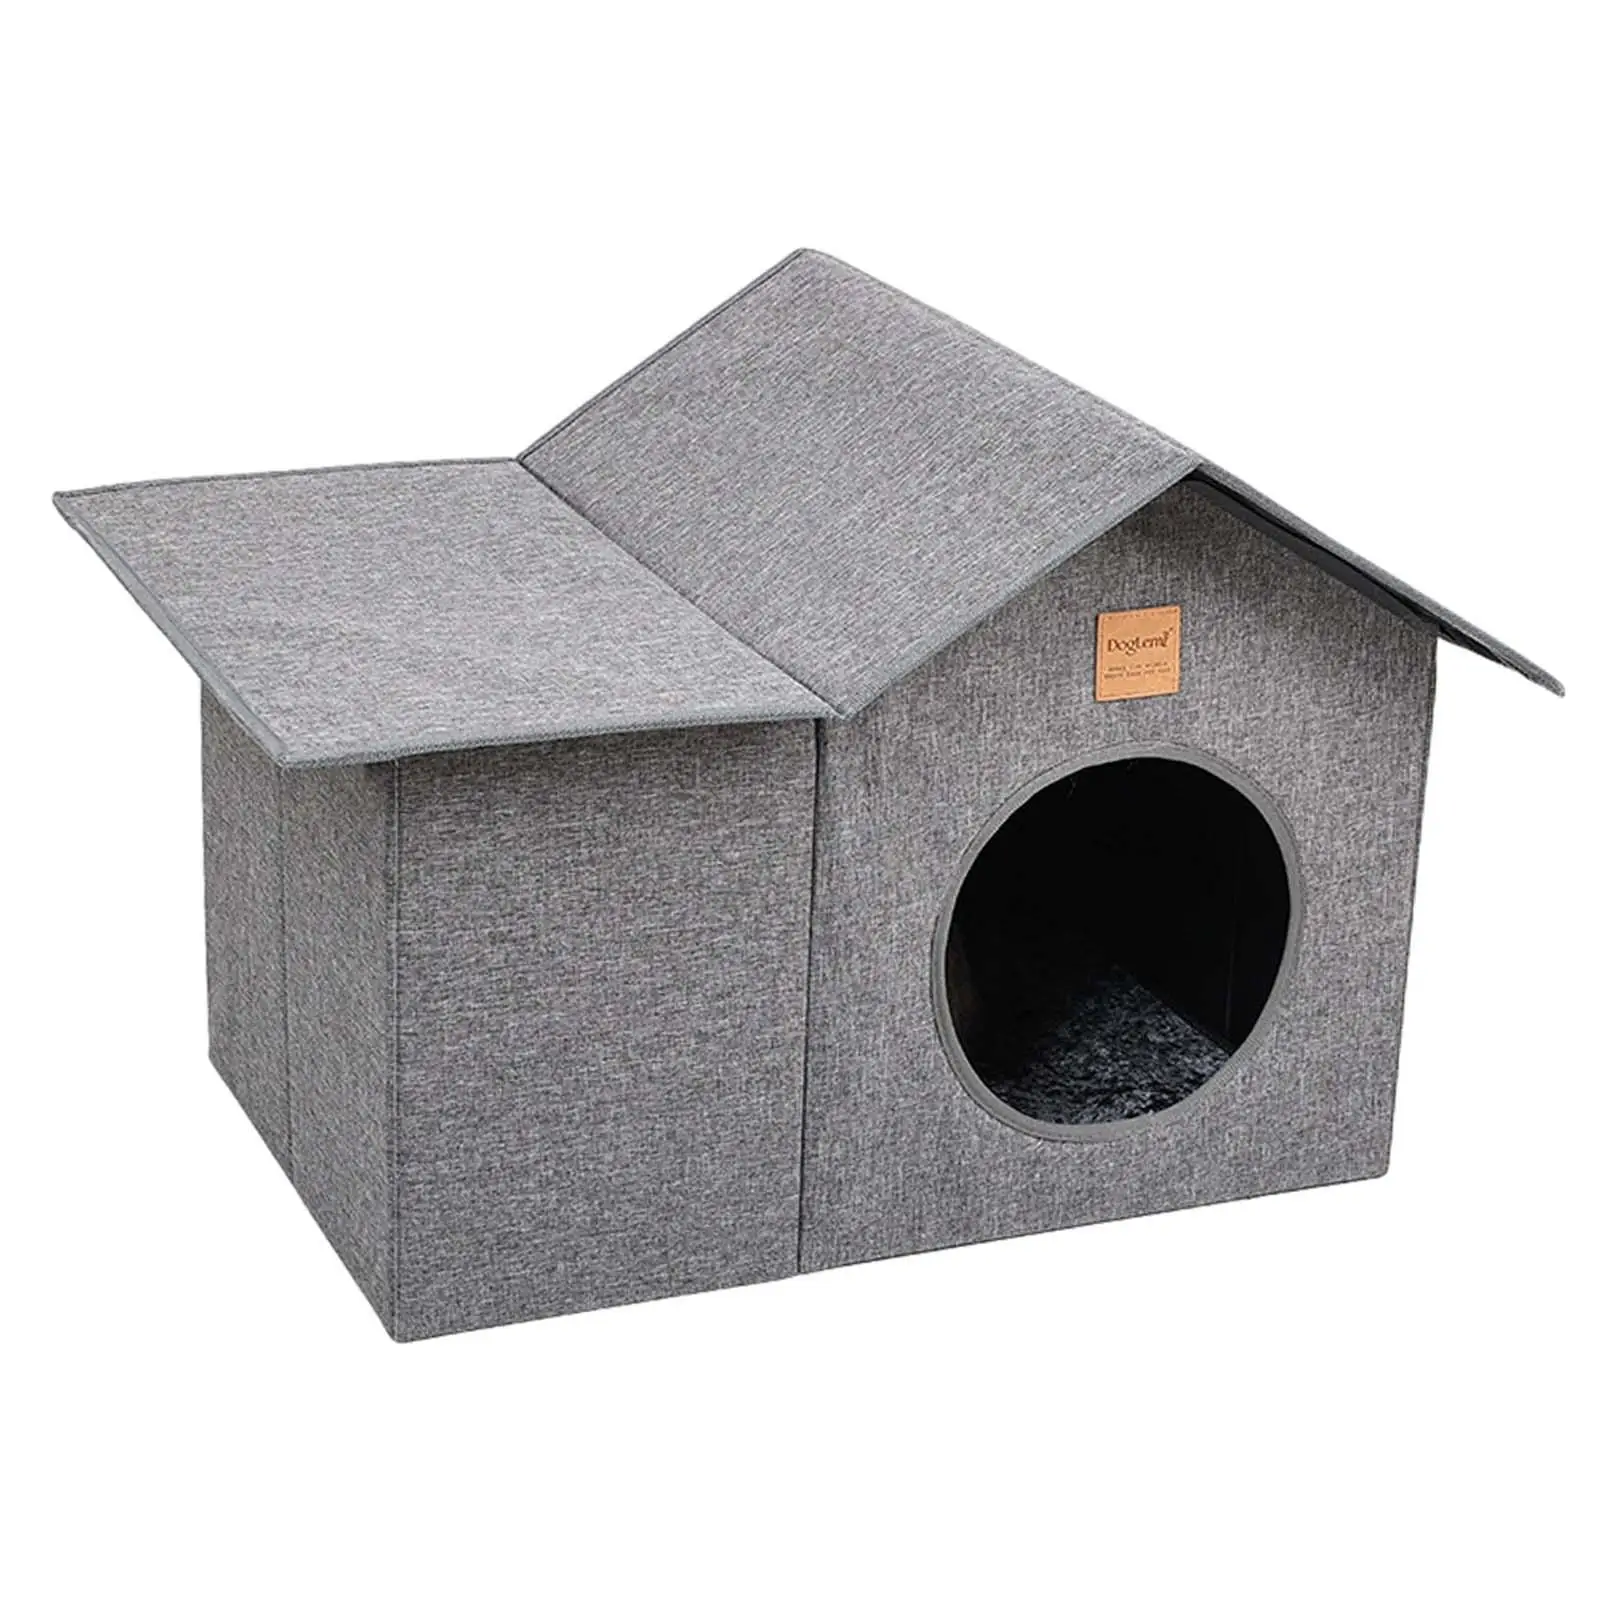 Outdoor Pet Shelter Stray Cat Shelter Warm House Cat House Foldable Cave House for Garden Lawn Courtyard Outdoor Indoor Cats Dog